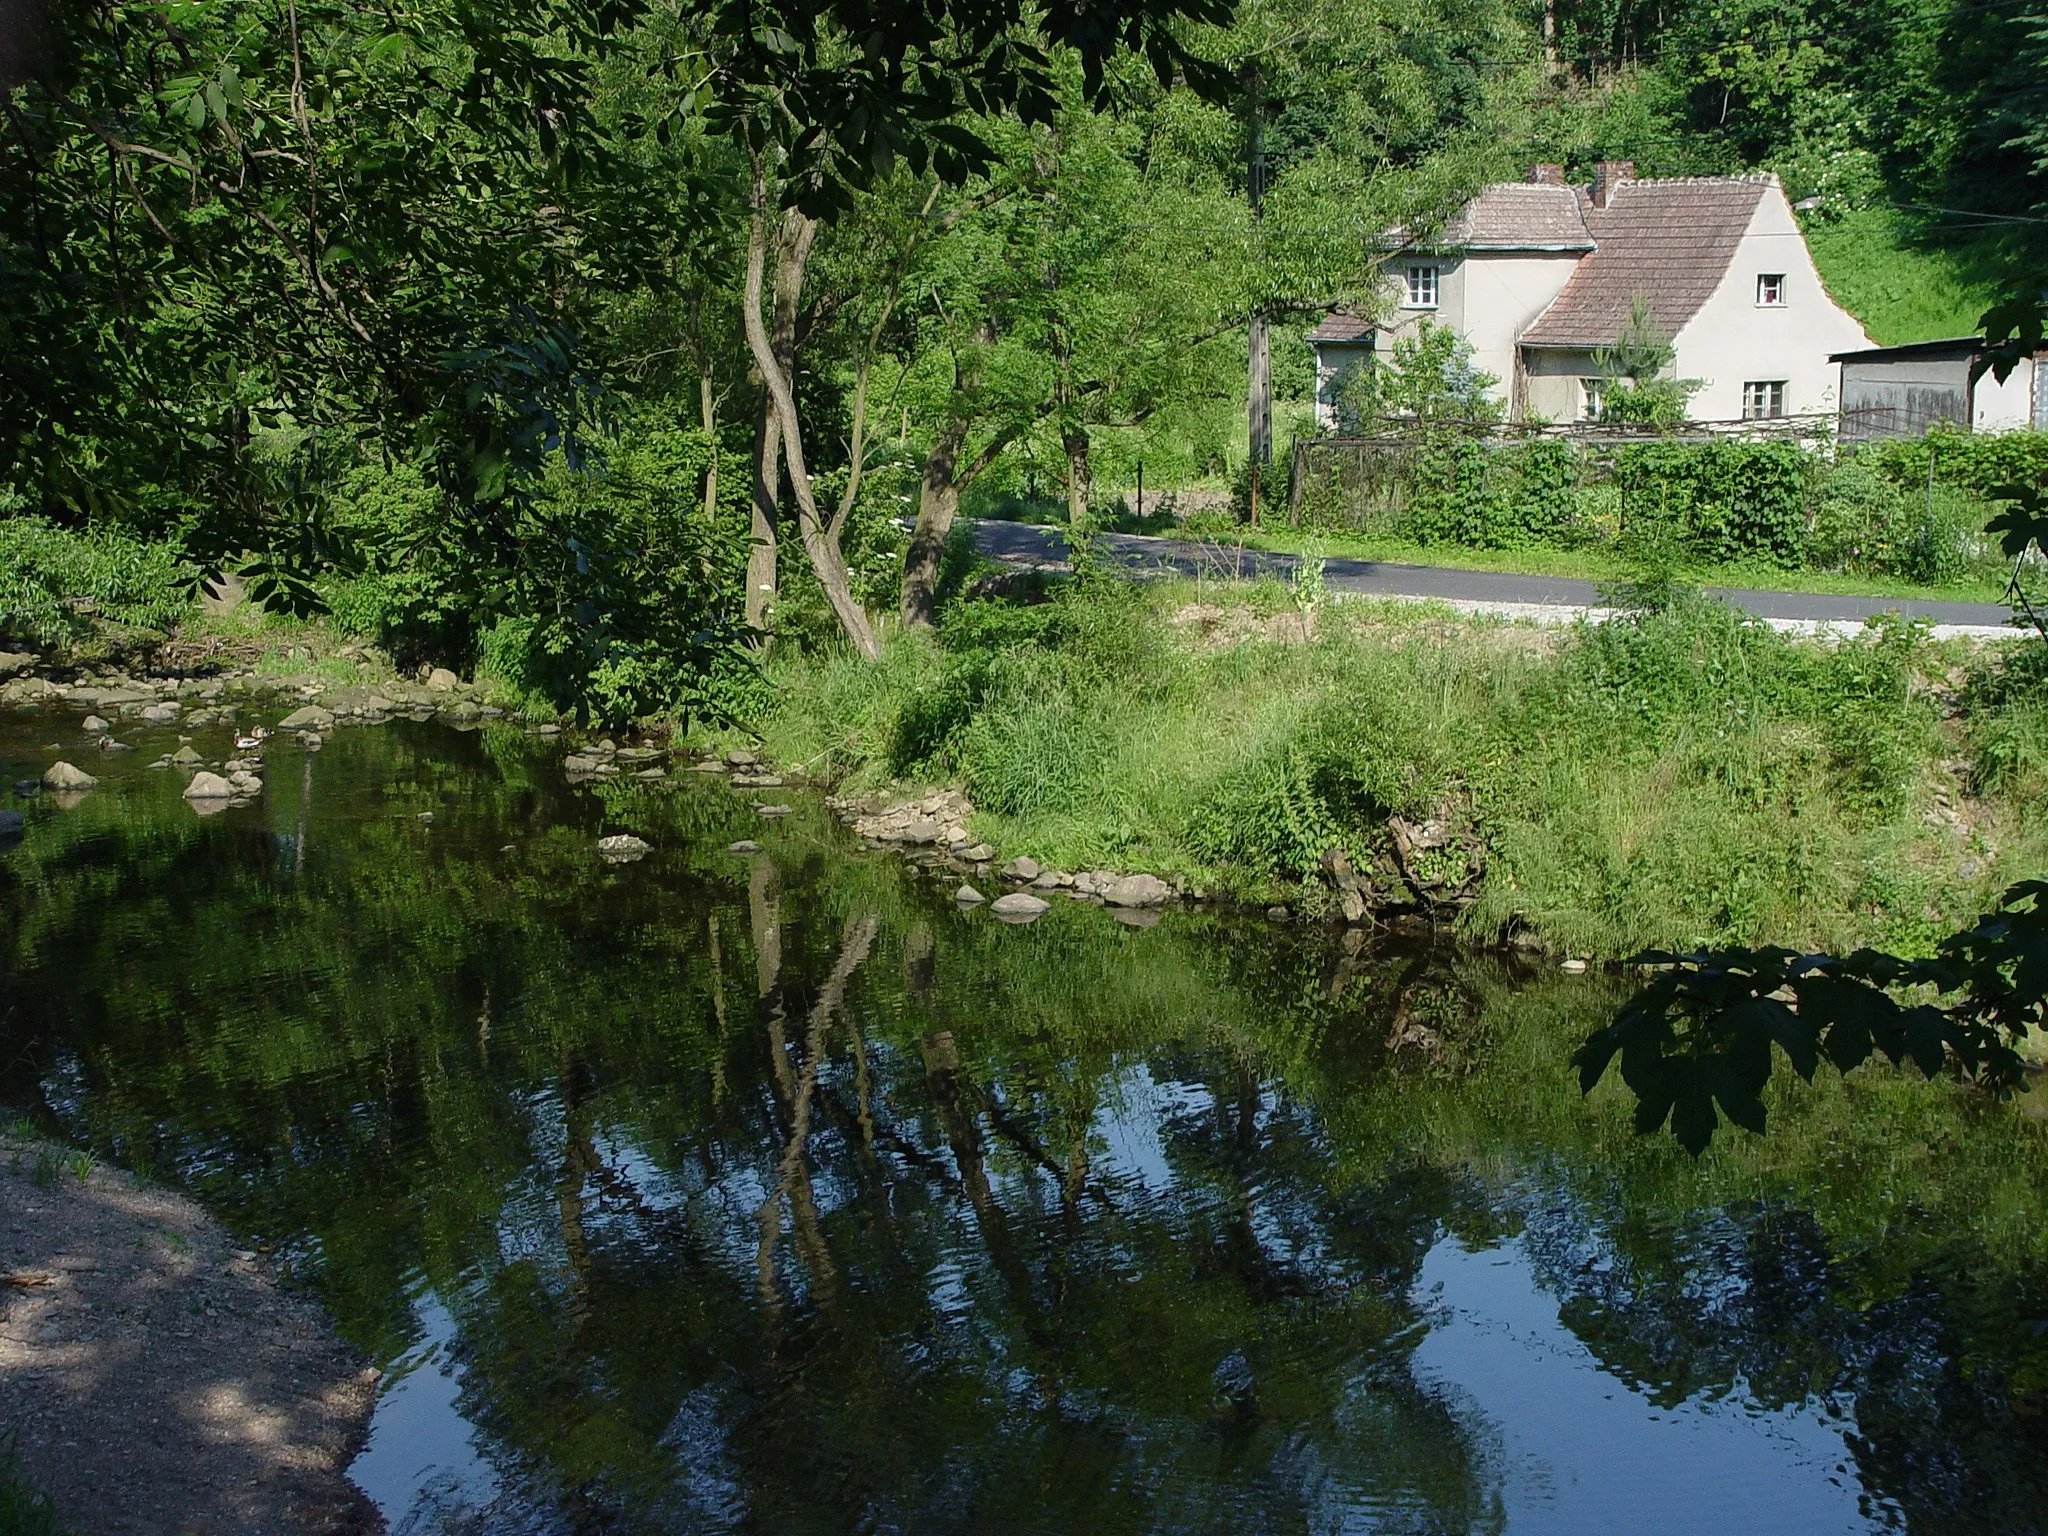 Photo showing: Bystrzyca River in Lubachów - a village in Lower Silesian Voivodship, Poland